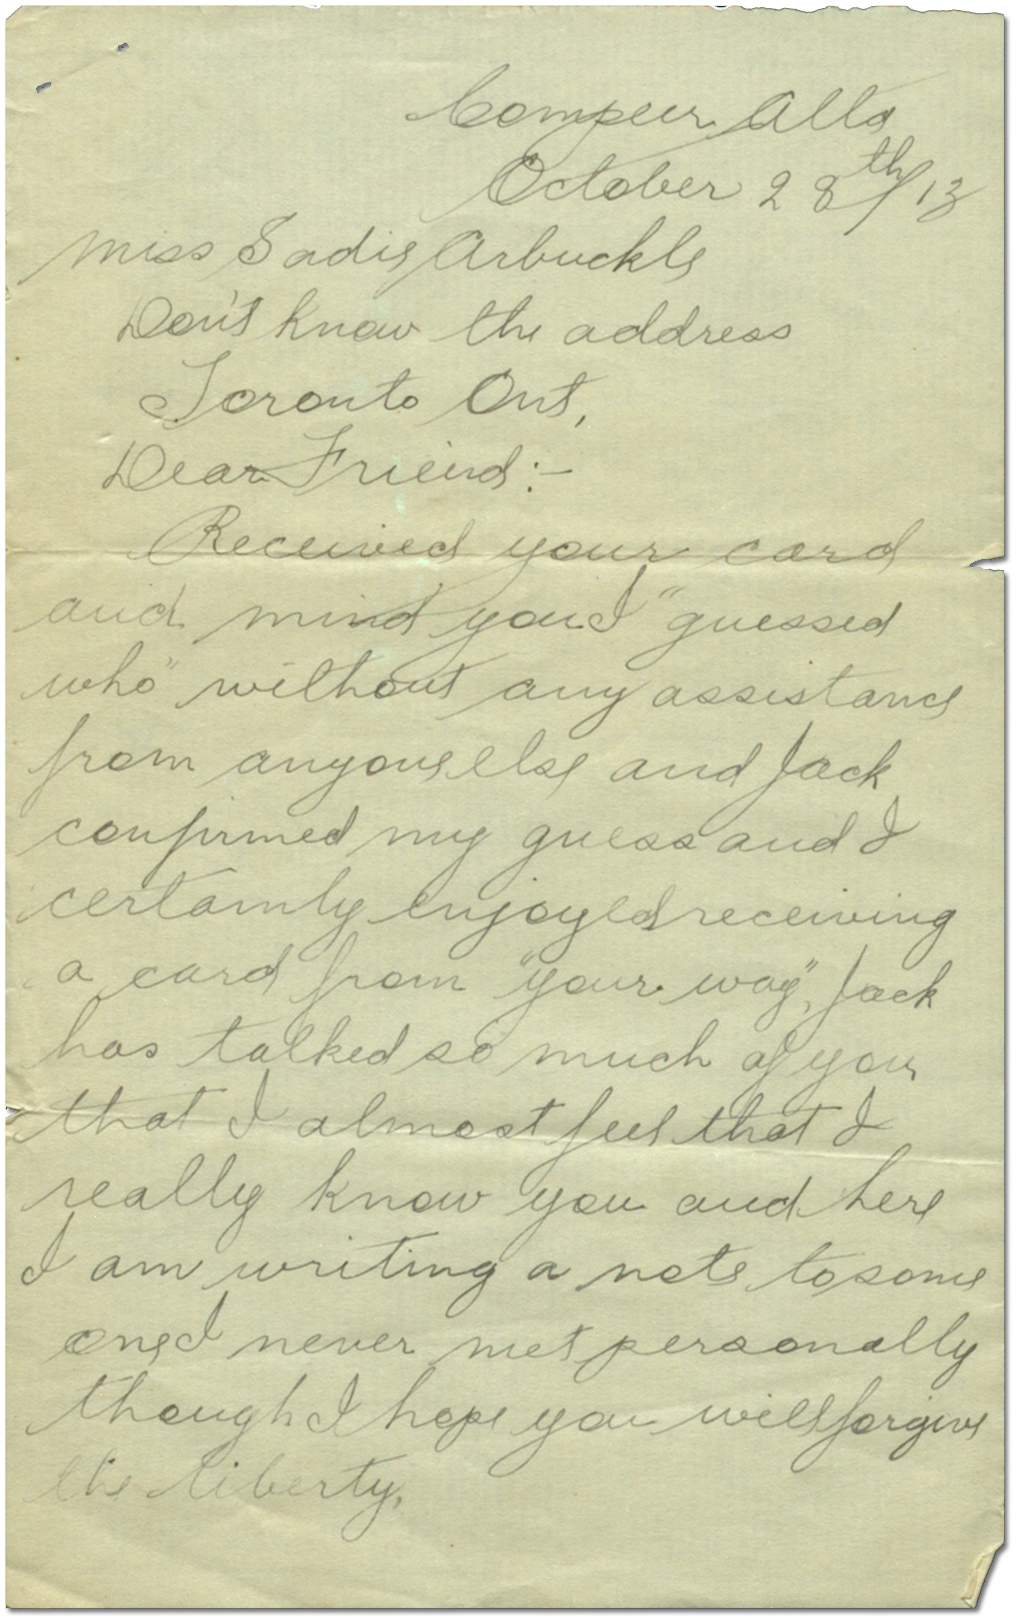 First letter from Harry Mason to Sadie Arbuckle, October 28, 1913